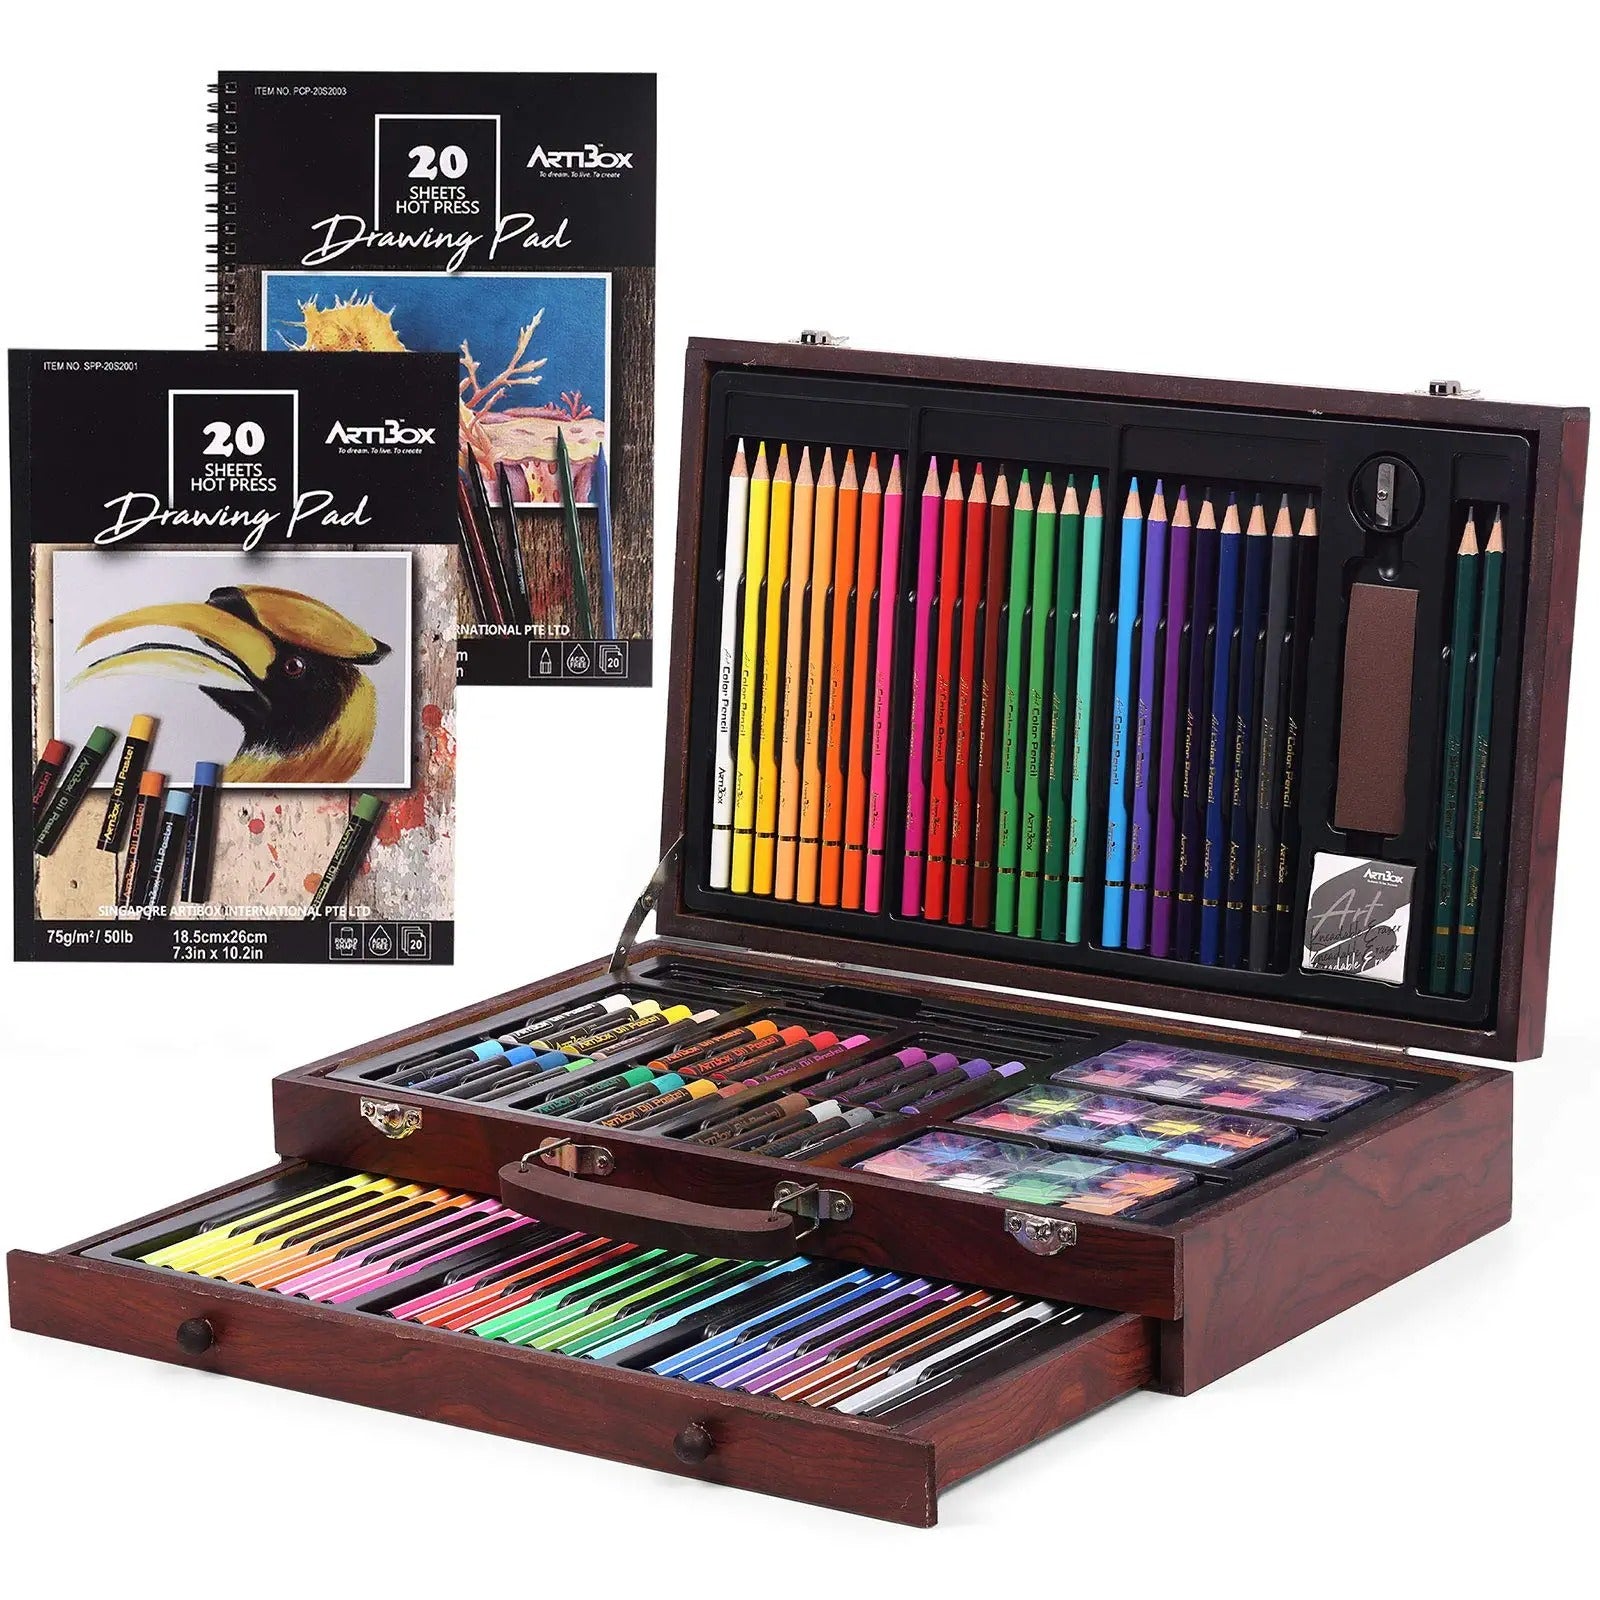 H & B 208-Piece Art Supplies Kit for Painting & Drawing Kids Art Set Case Portable Art Box Oil Pastels Crayons Colored Pencils Markers Great